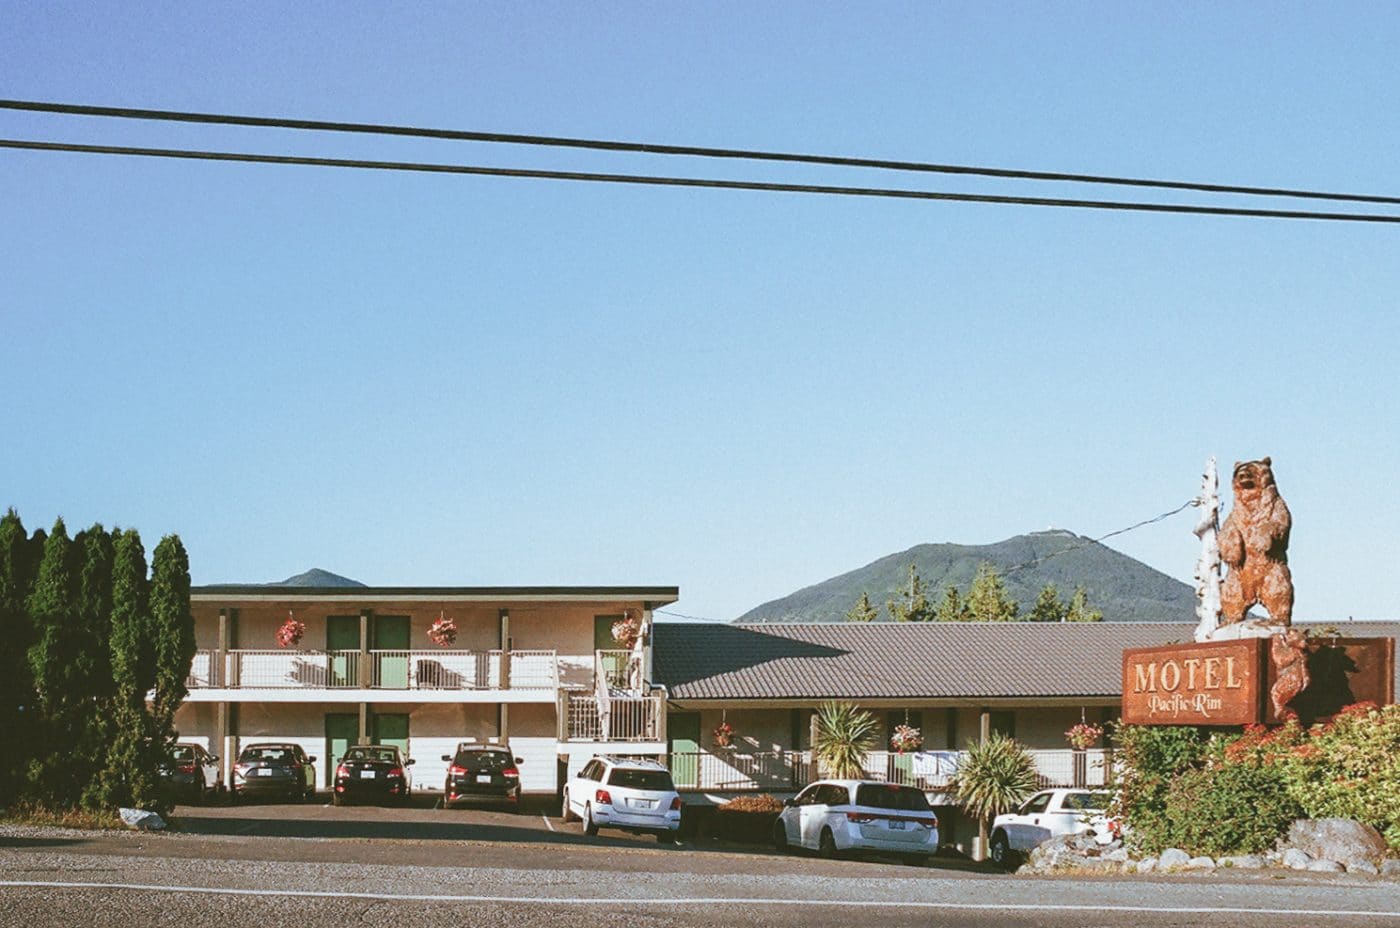 photo series on motels in Canada by Sacha Jennis